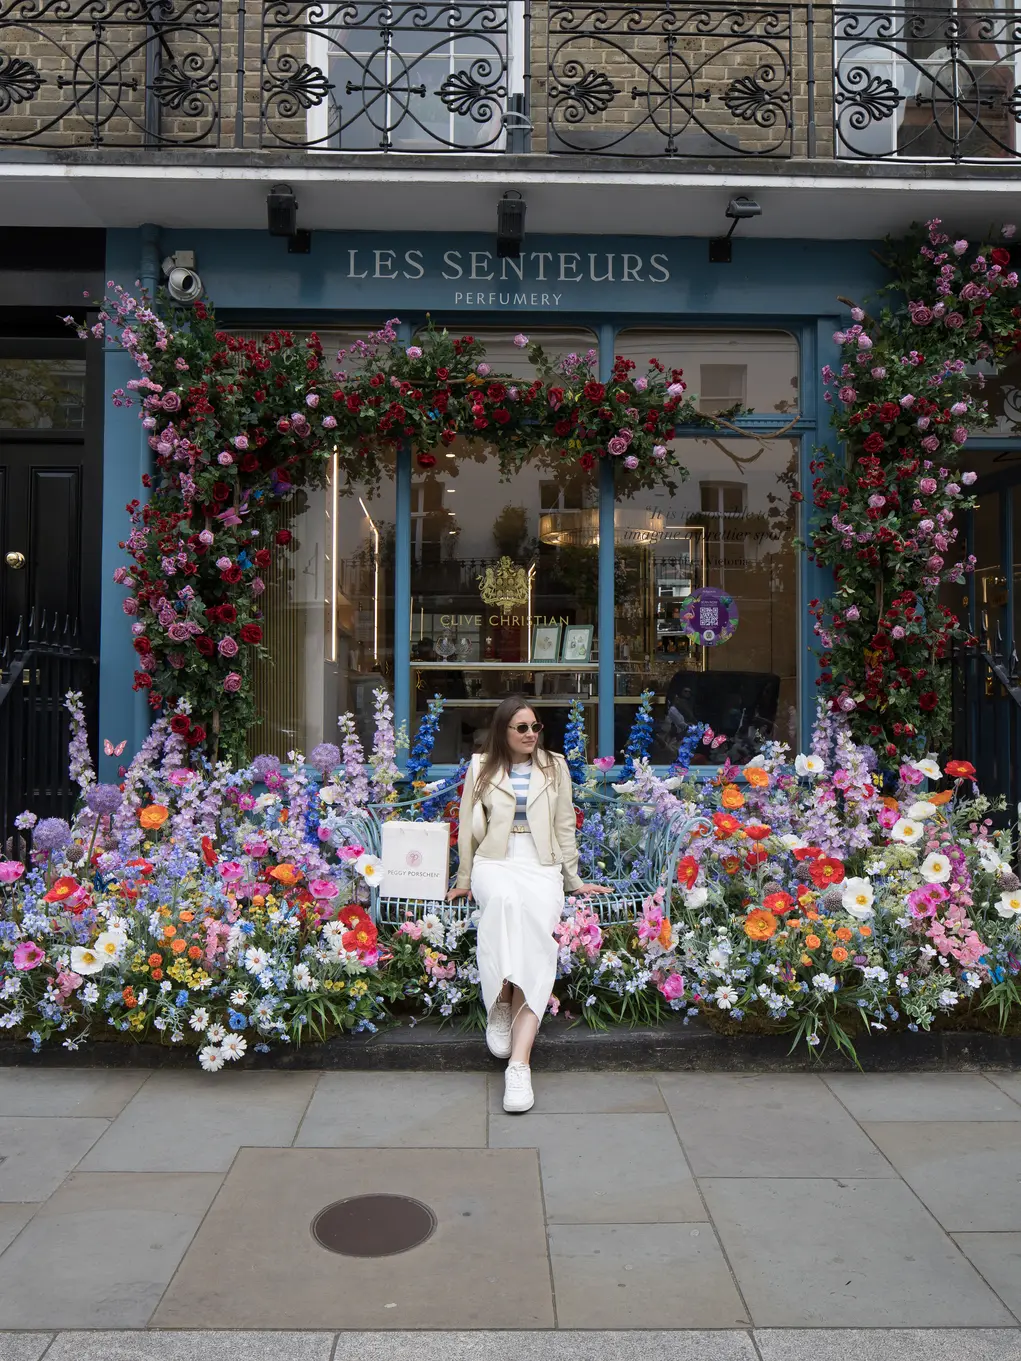 A girl poses outside a shop covered in a huge floral display